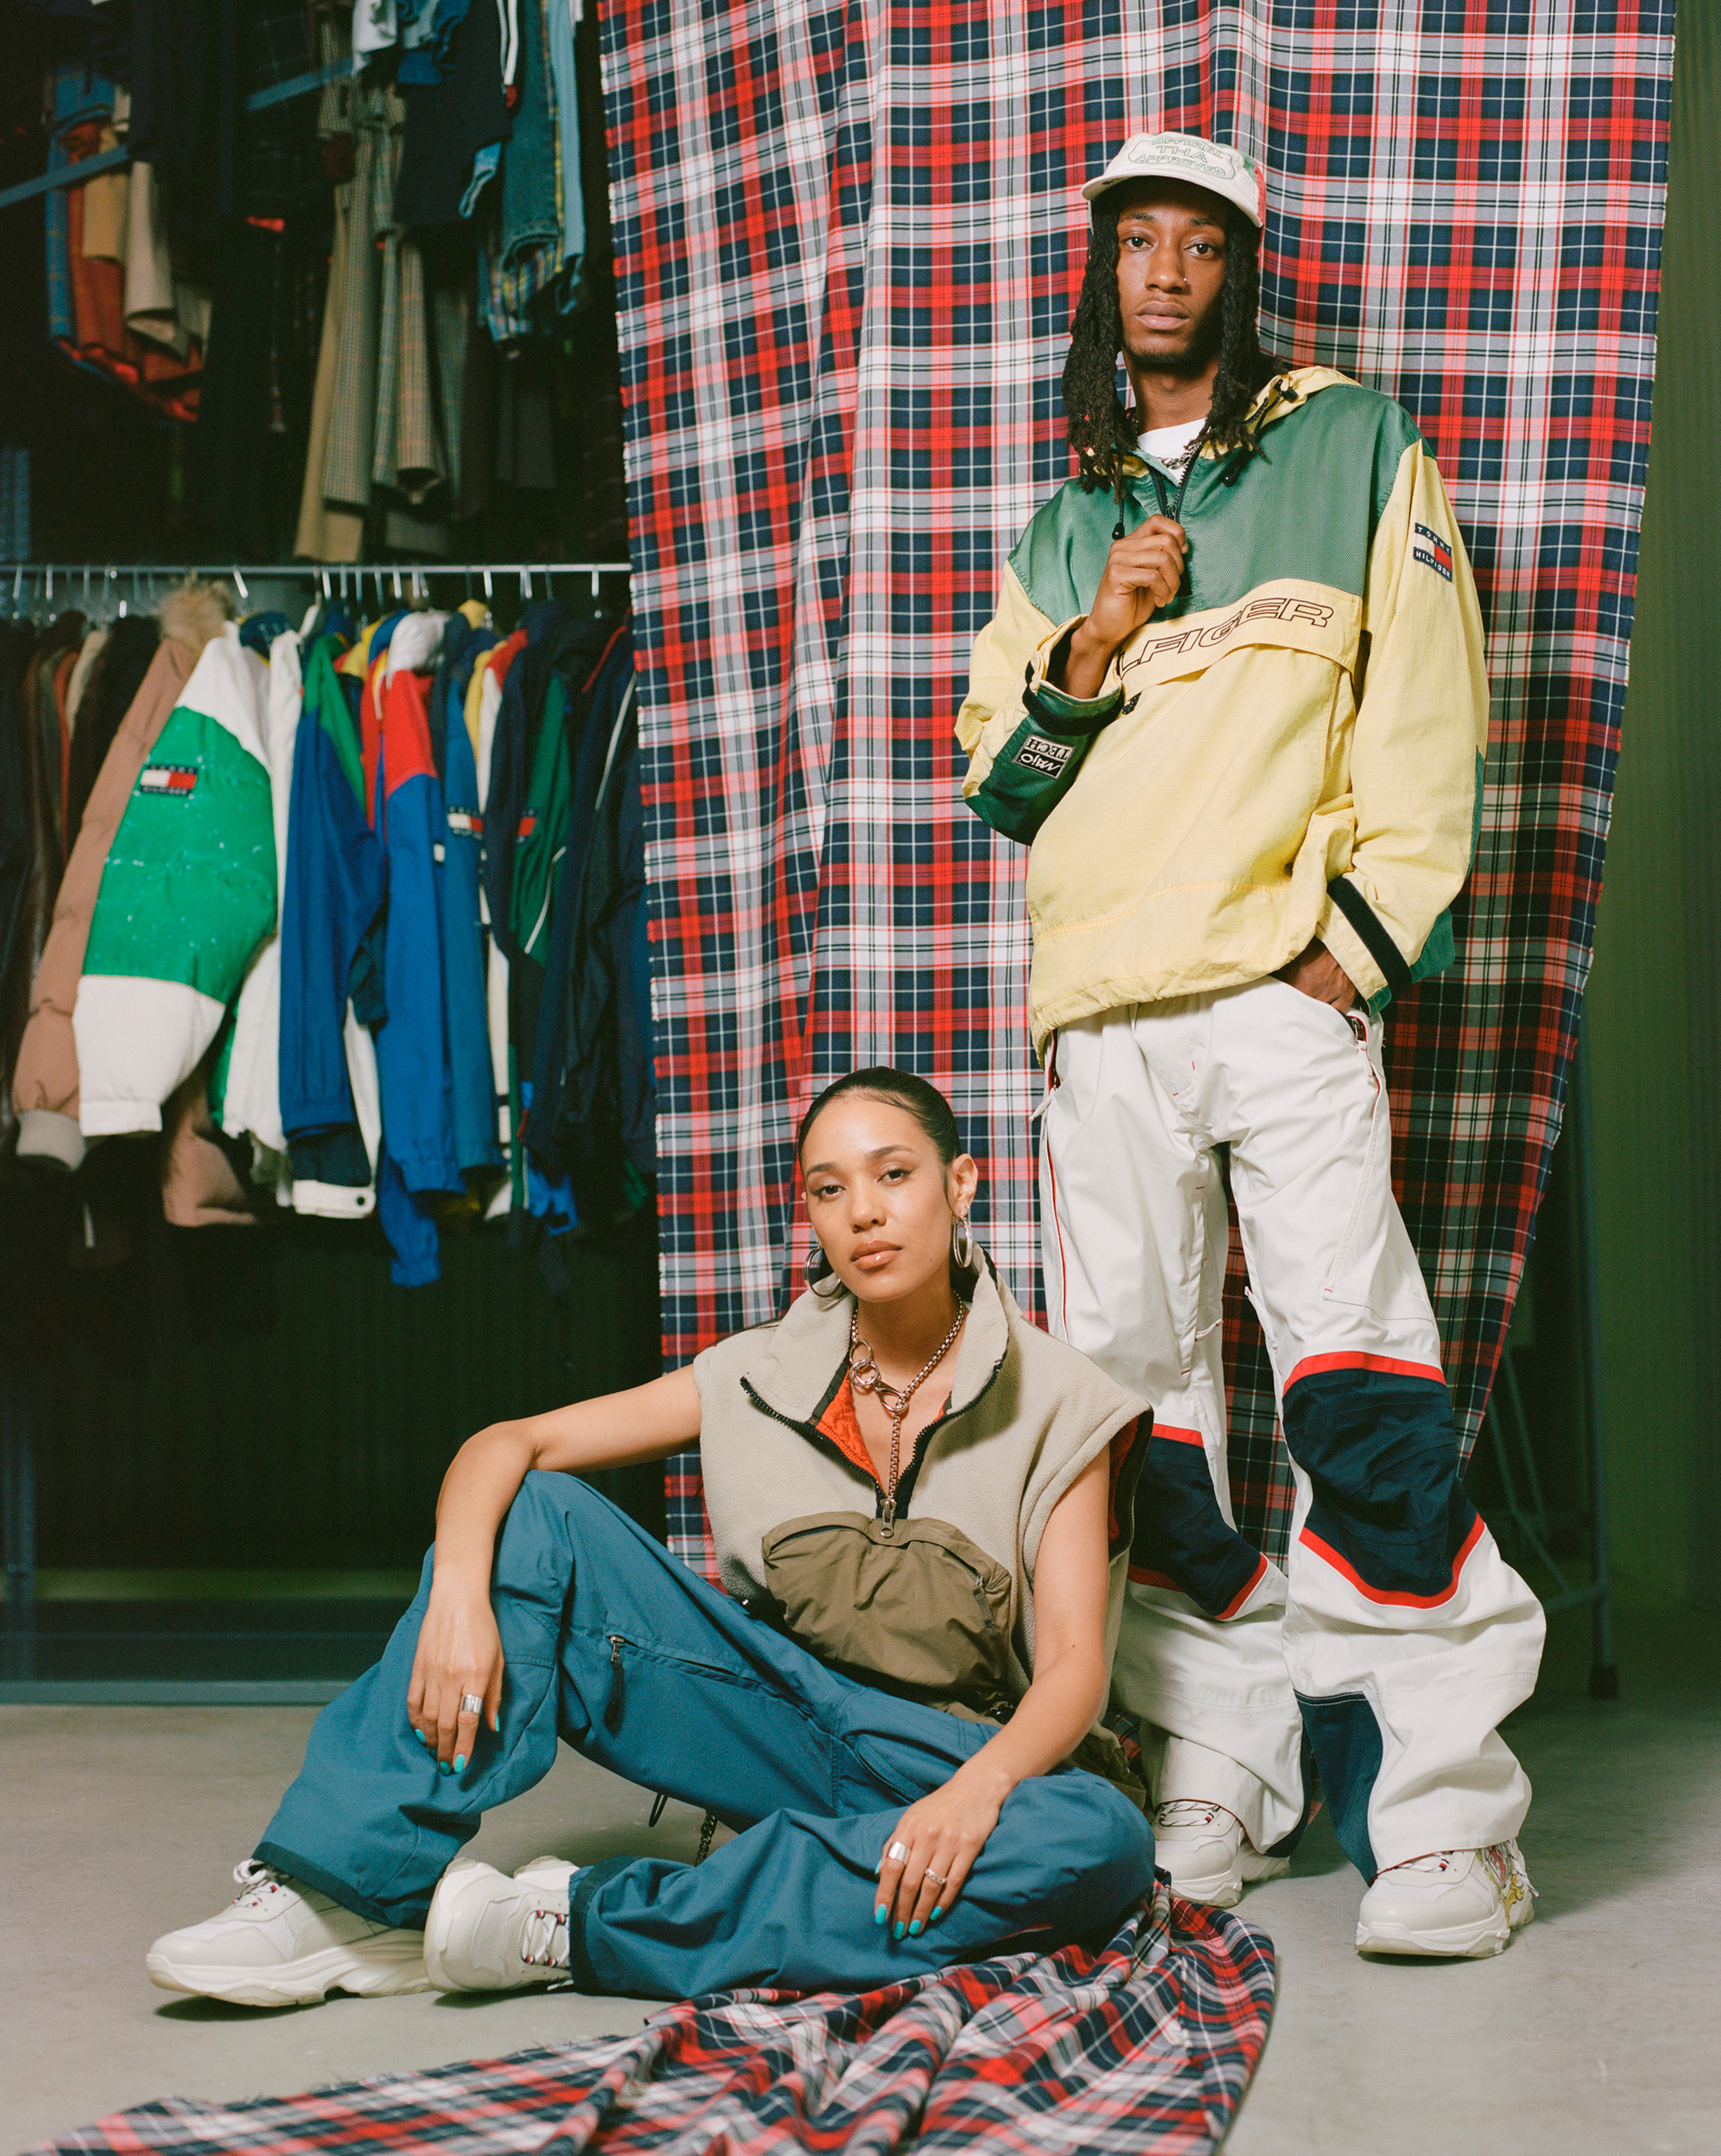 Tommy Hilfiger to Sell Vintage From the '90s Early - Daily Front Row